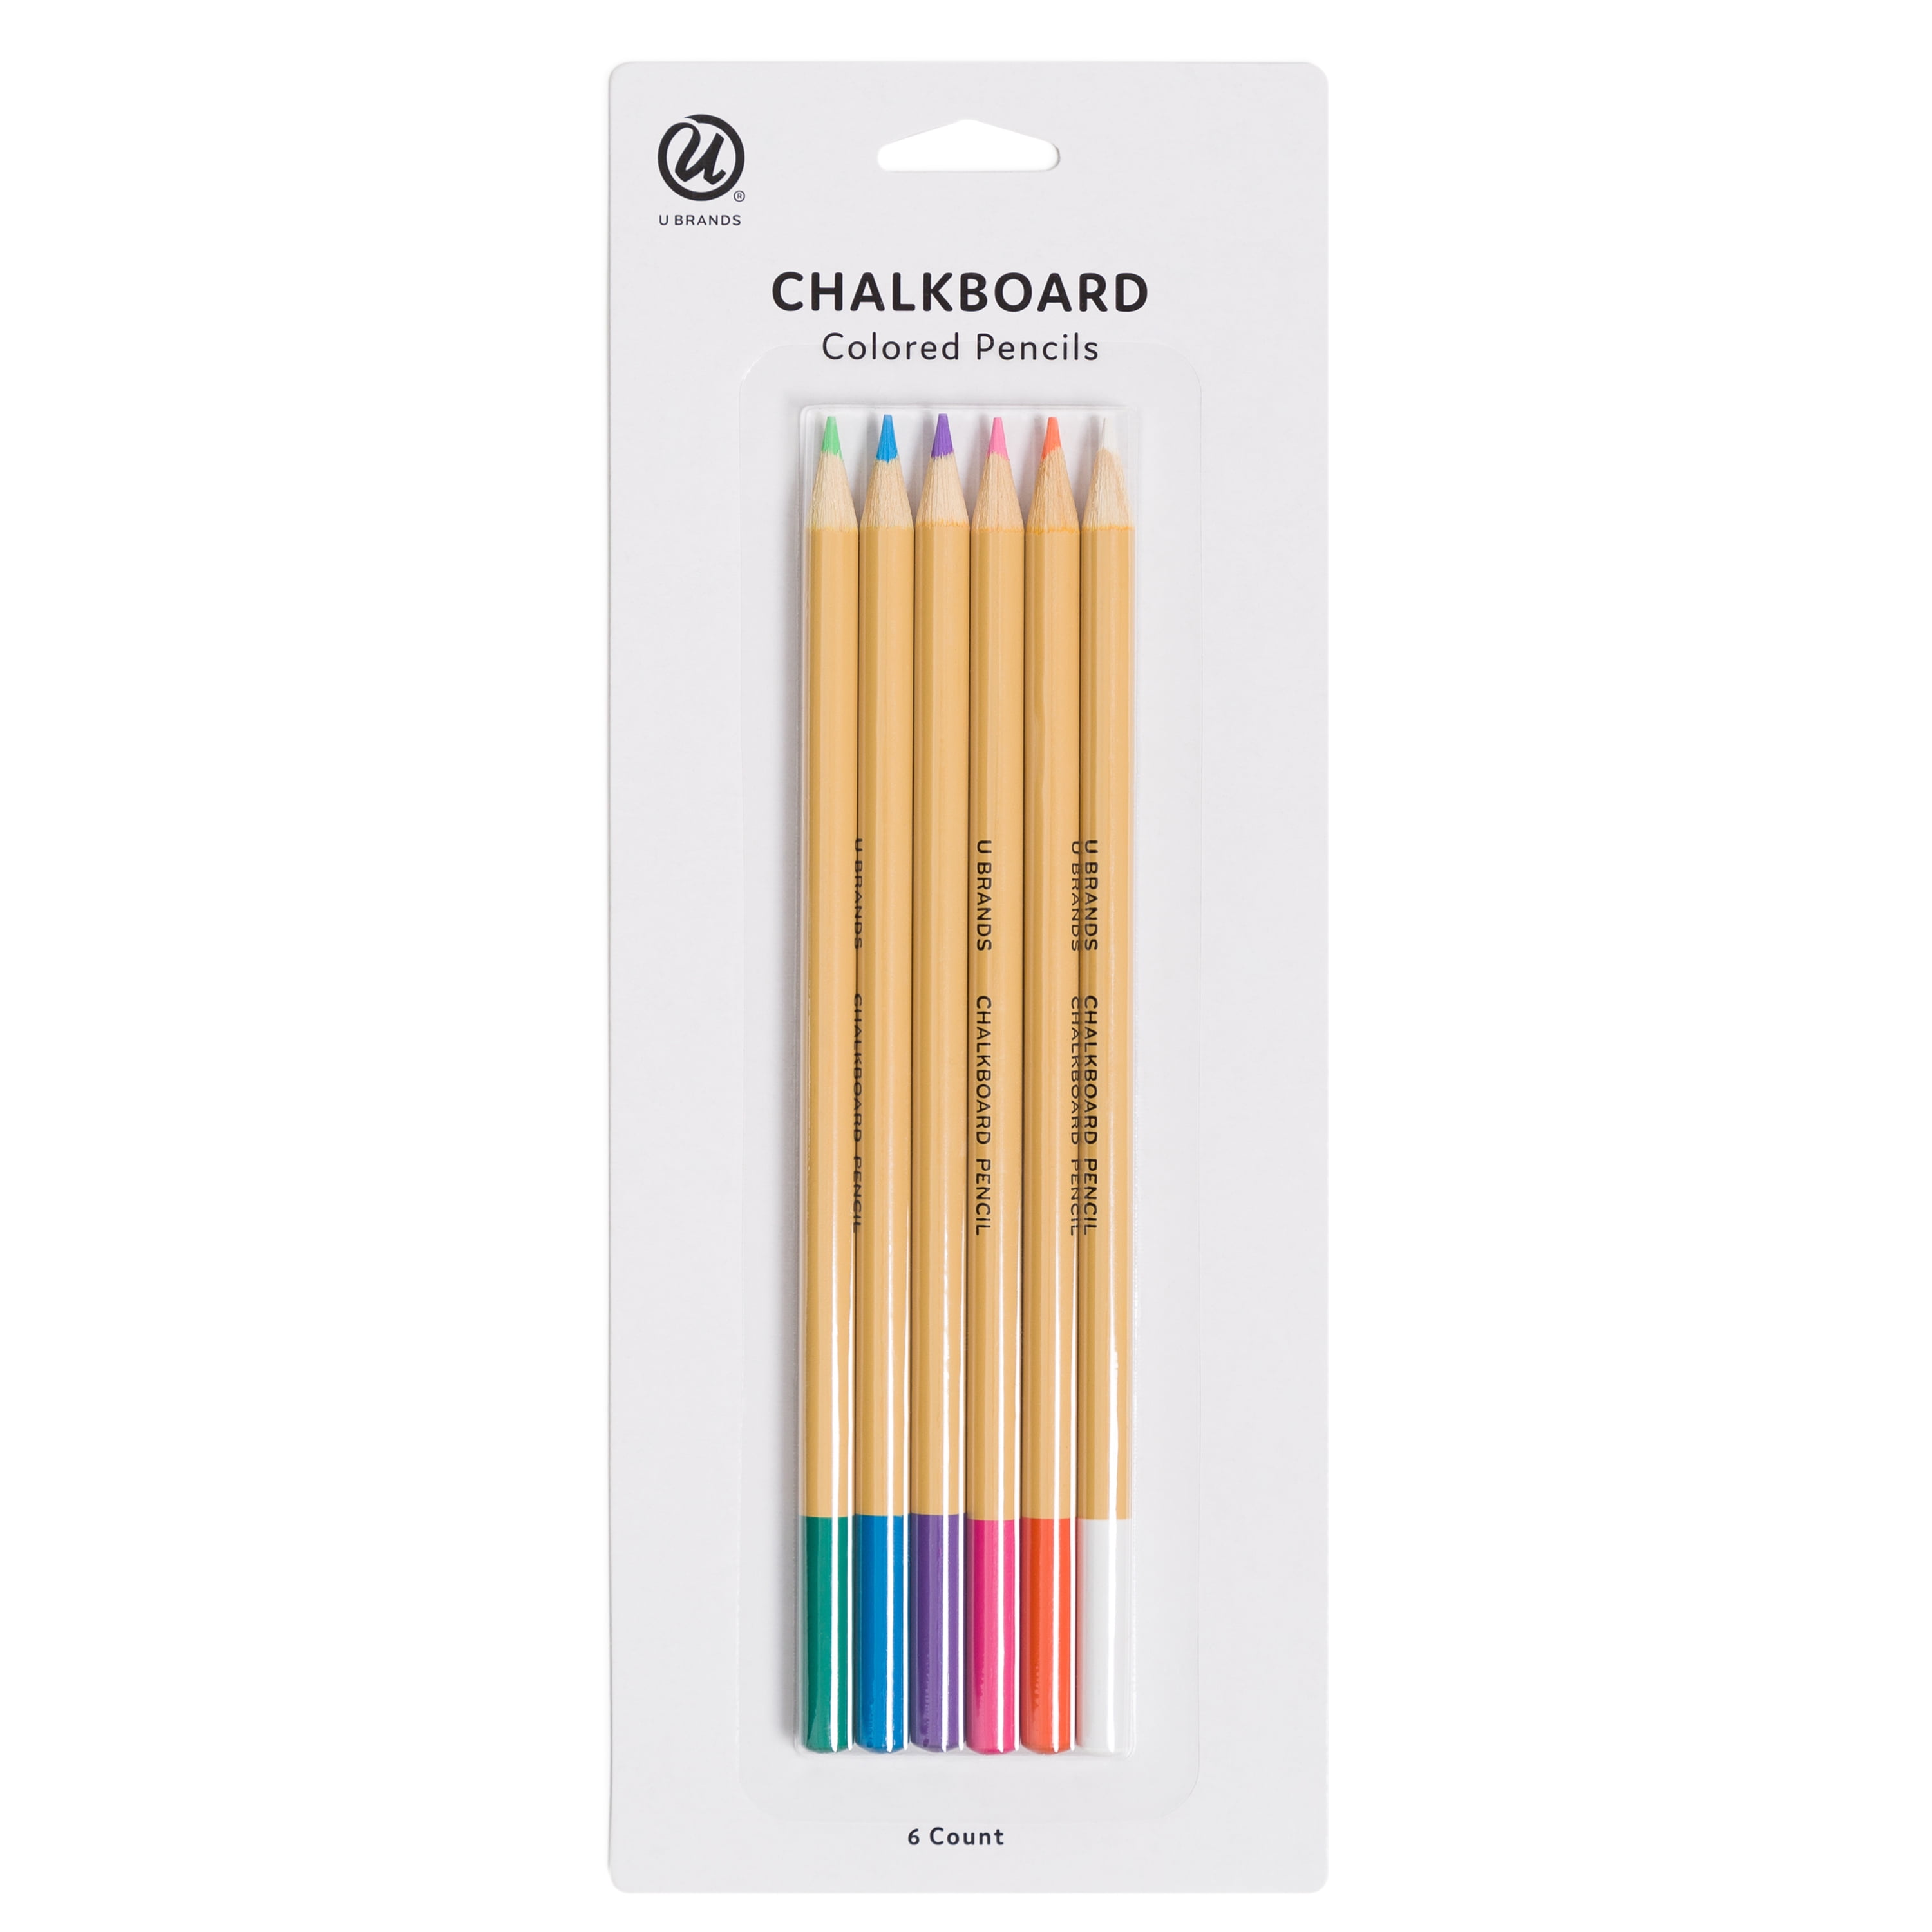 Can't Color With Just One: Reviewing 6 Brands of Colored Pencils